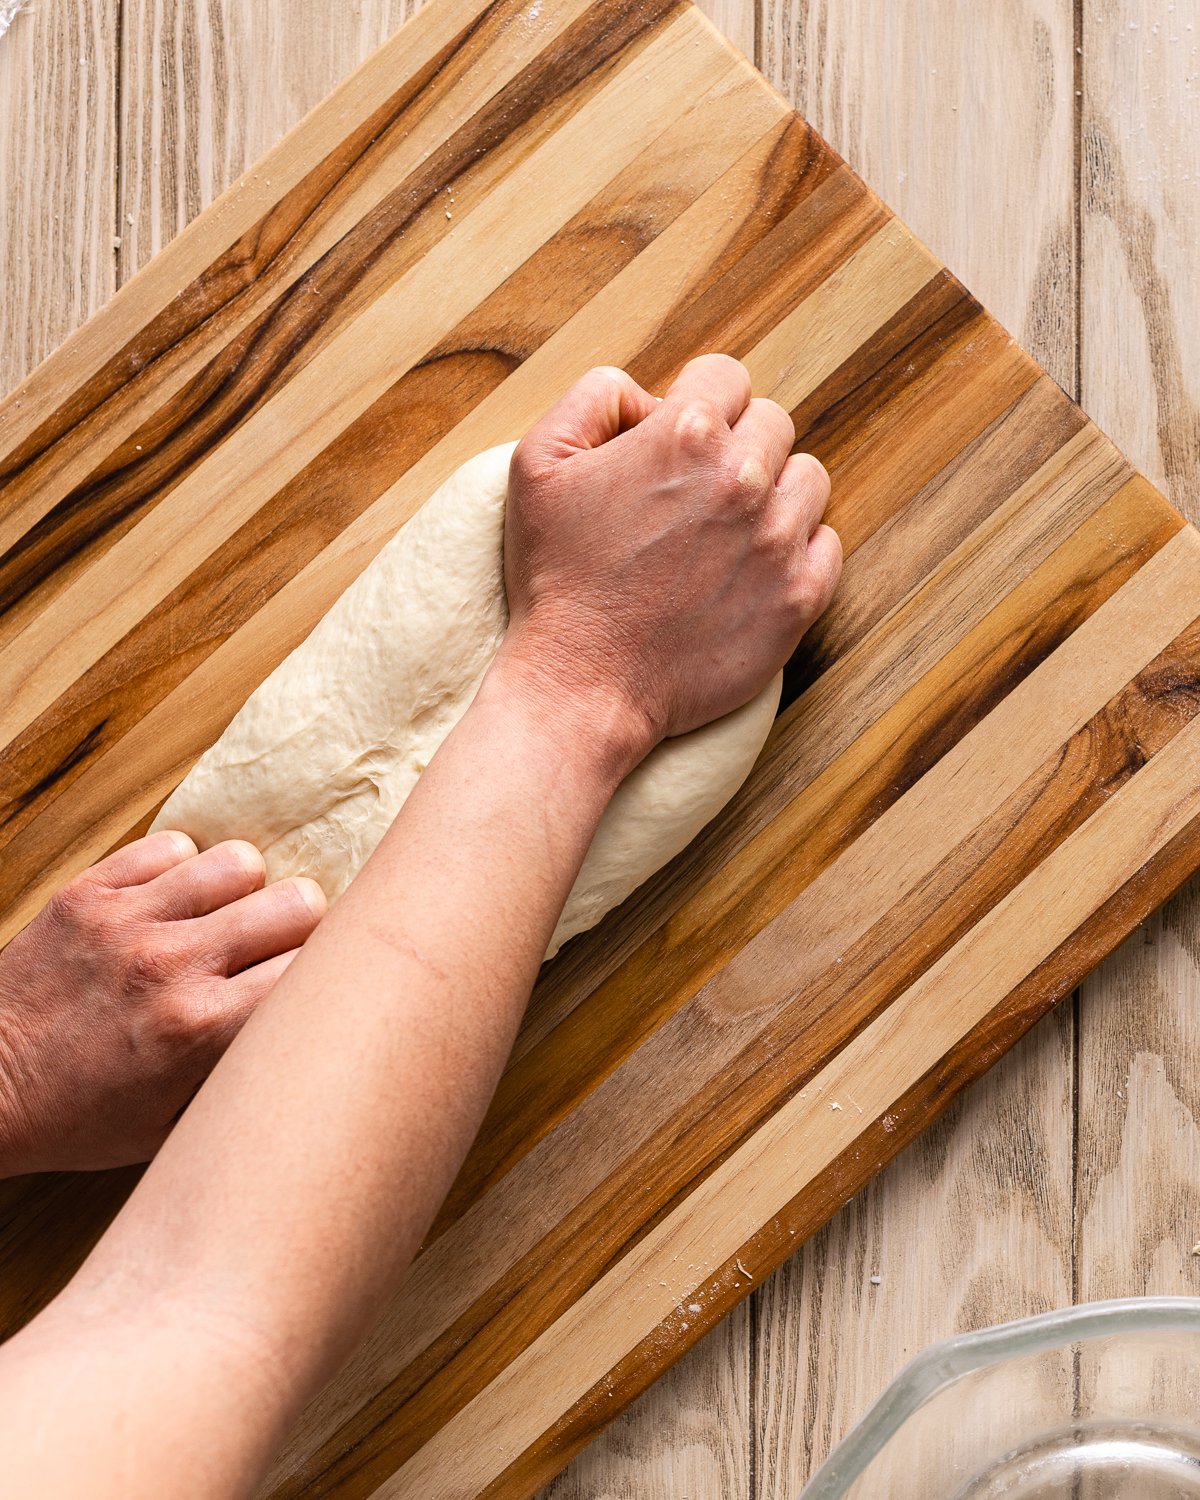 hands kneading dough on a wood cutting board